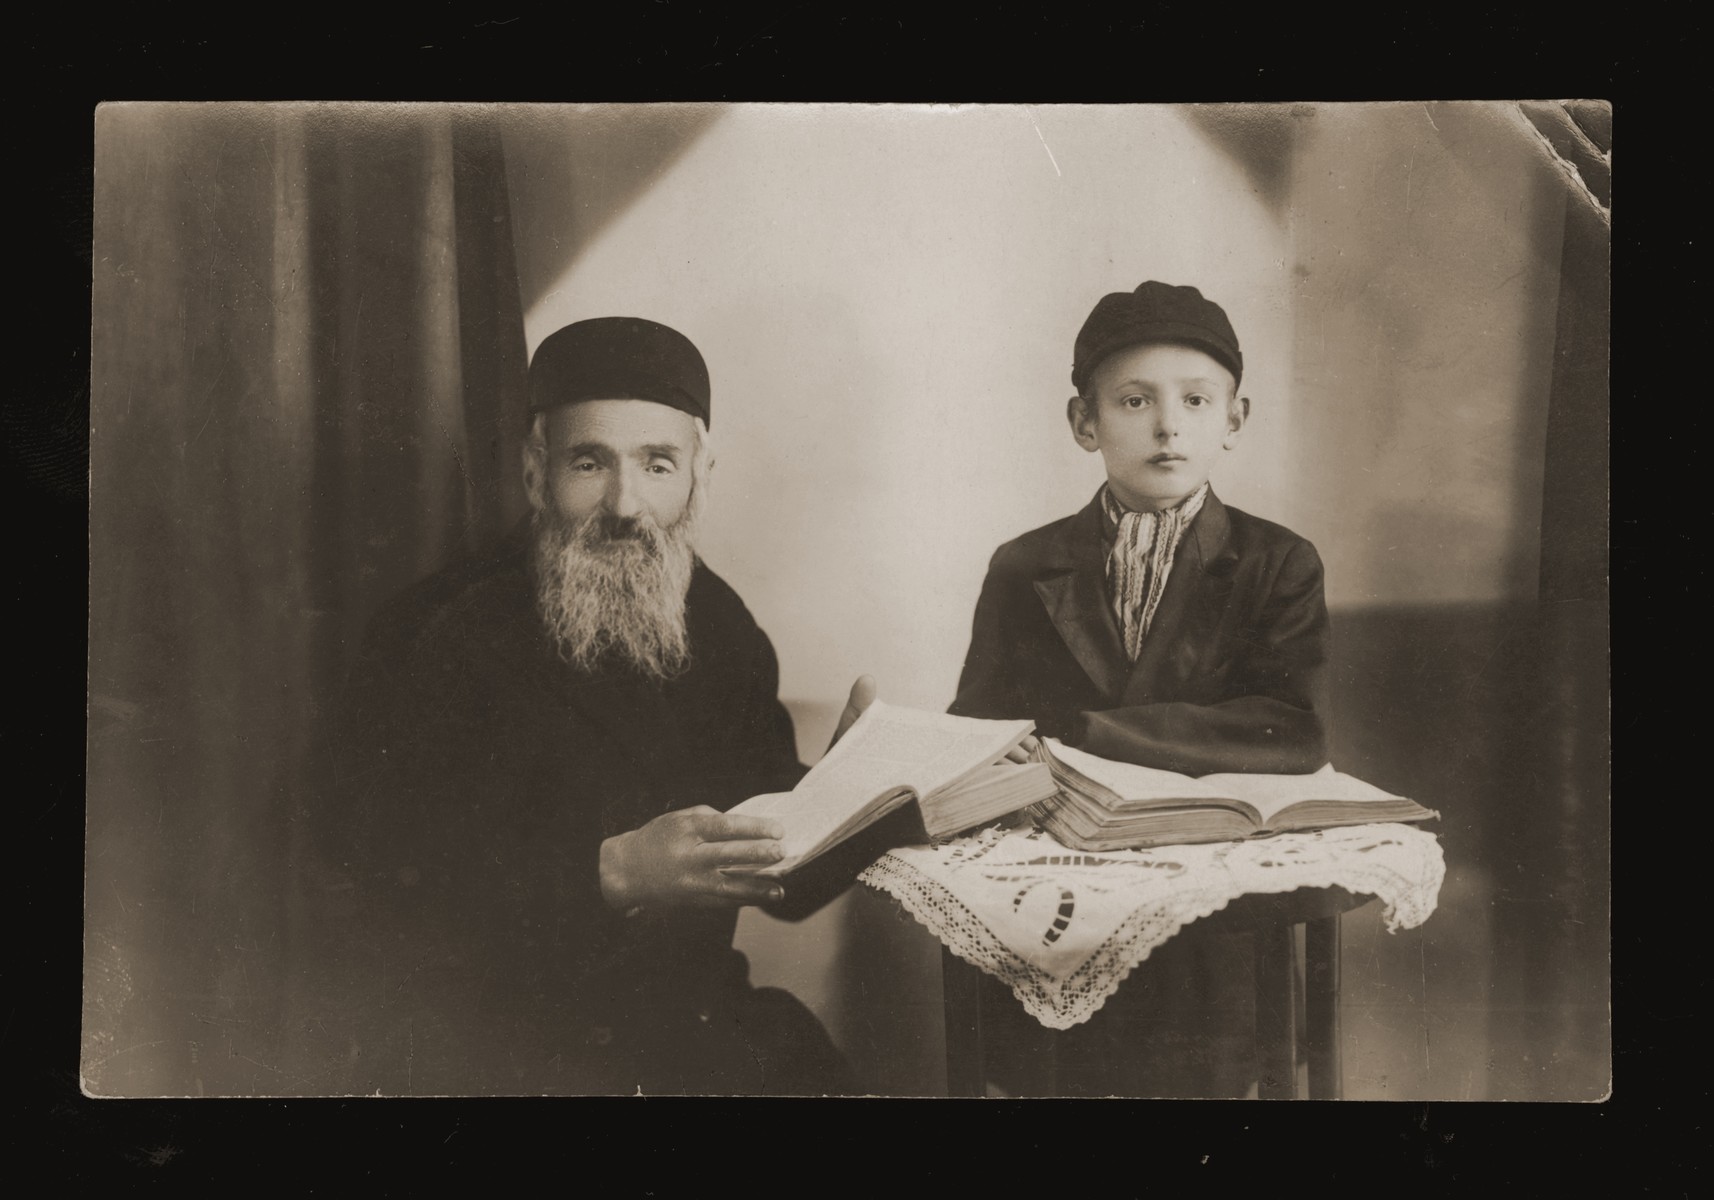 Portrait of an eldery Jewish man studying a religious text with a young boy.